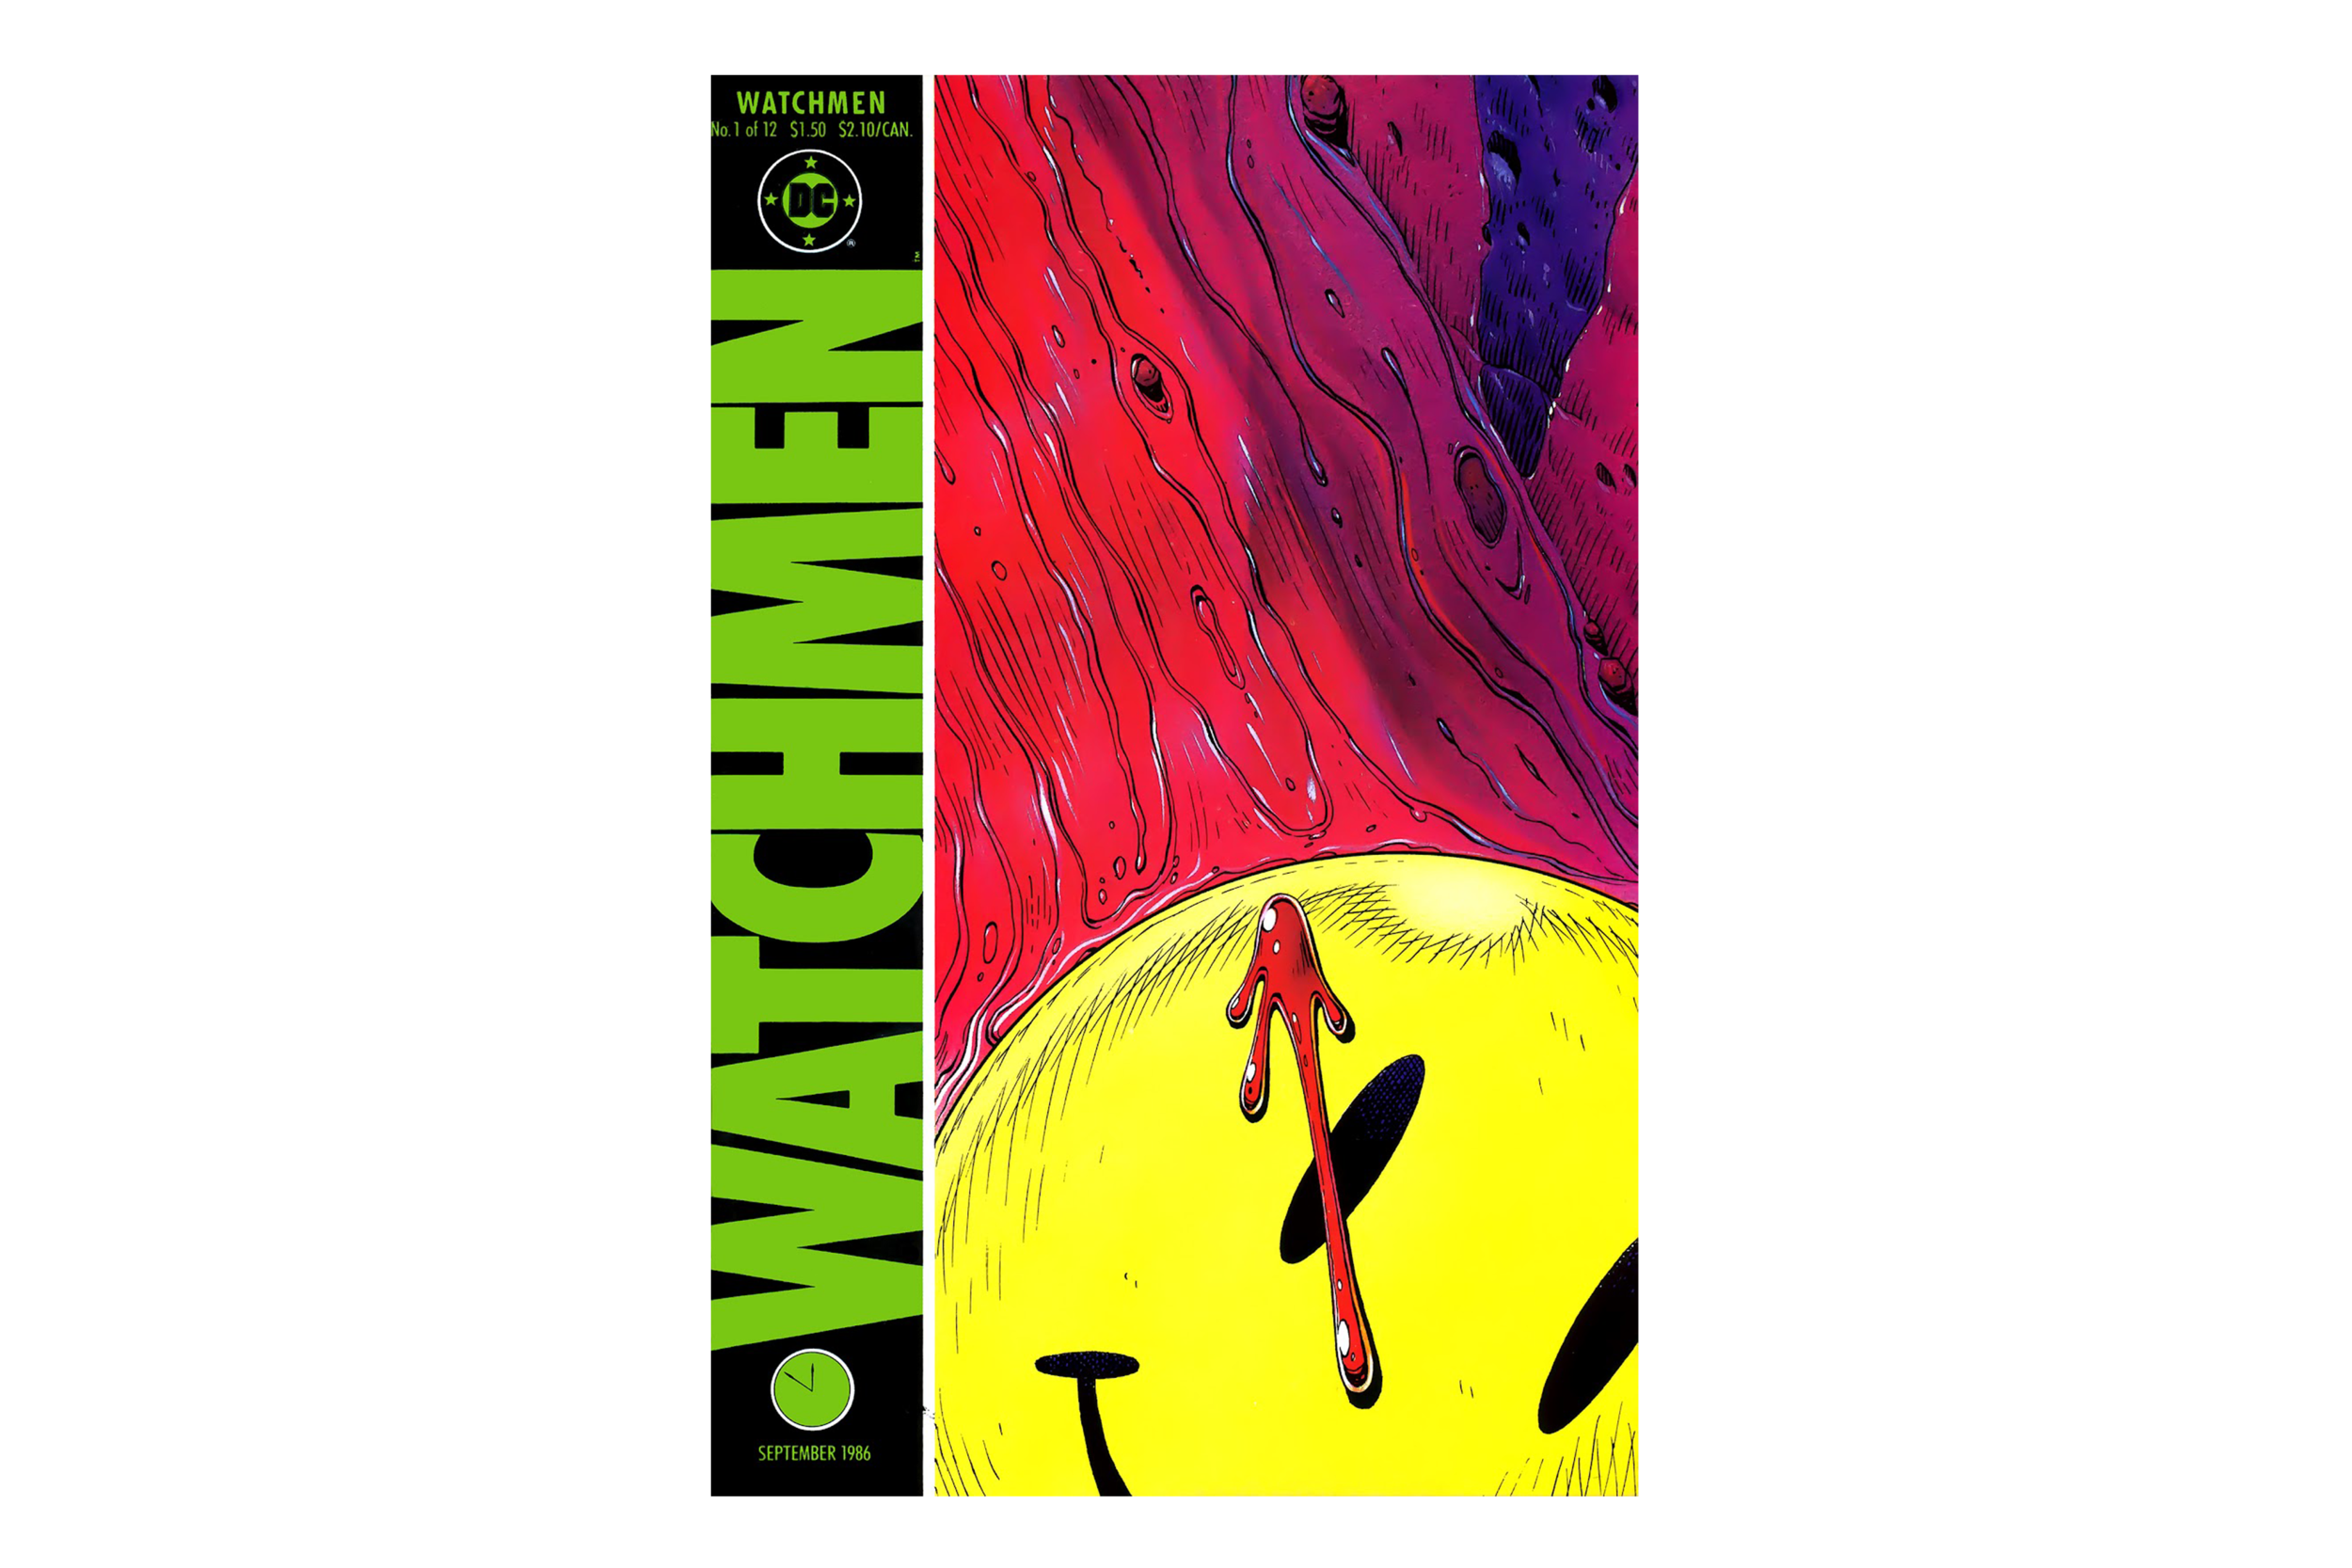  Alan Moore and Dave Gibbons - Watchmen Source:  Syfy  